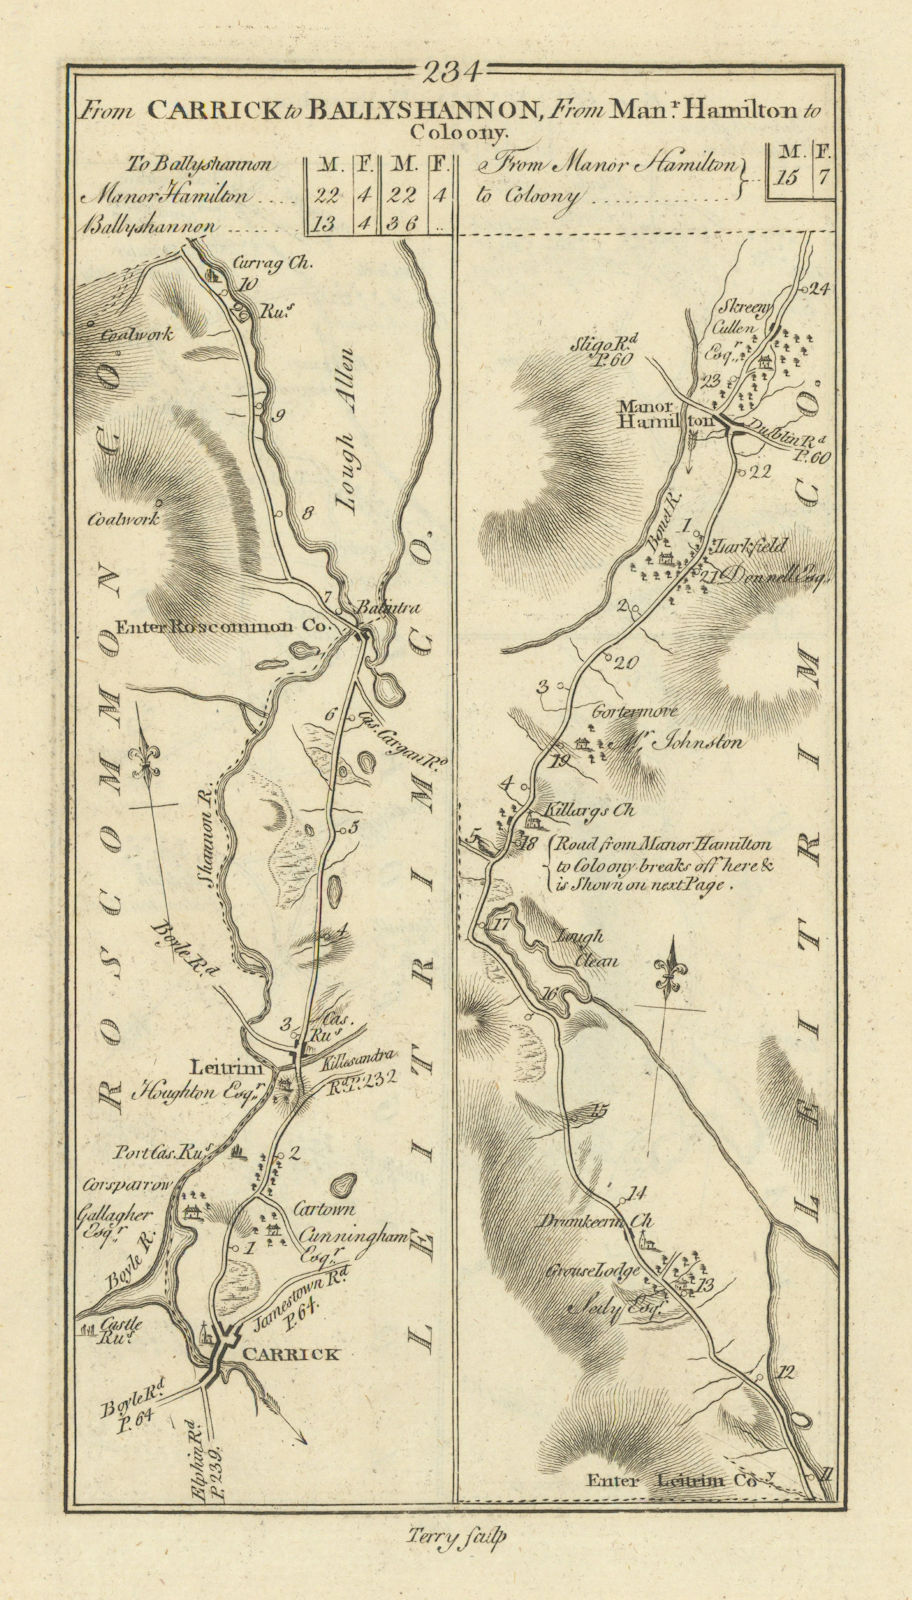 Associate Product #234 Carrick to Ballyshannon. Manorhamilton to Coloony. TAYLOR/SKINNER 1778 map